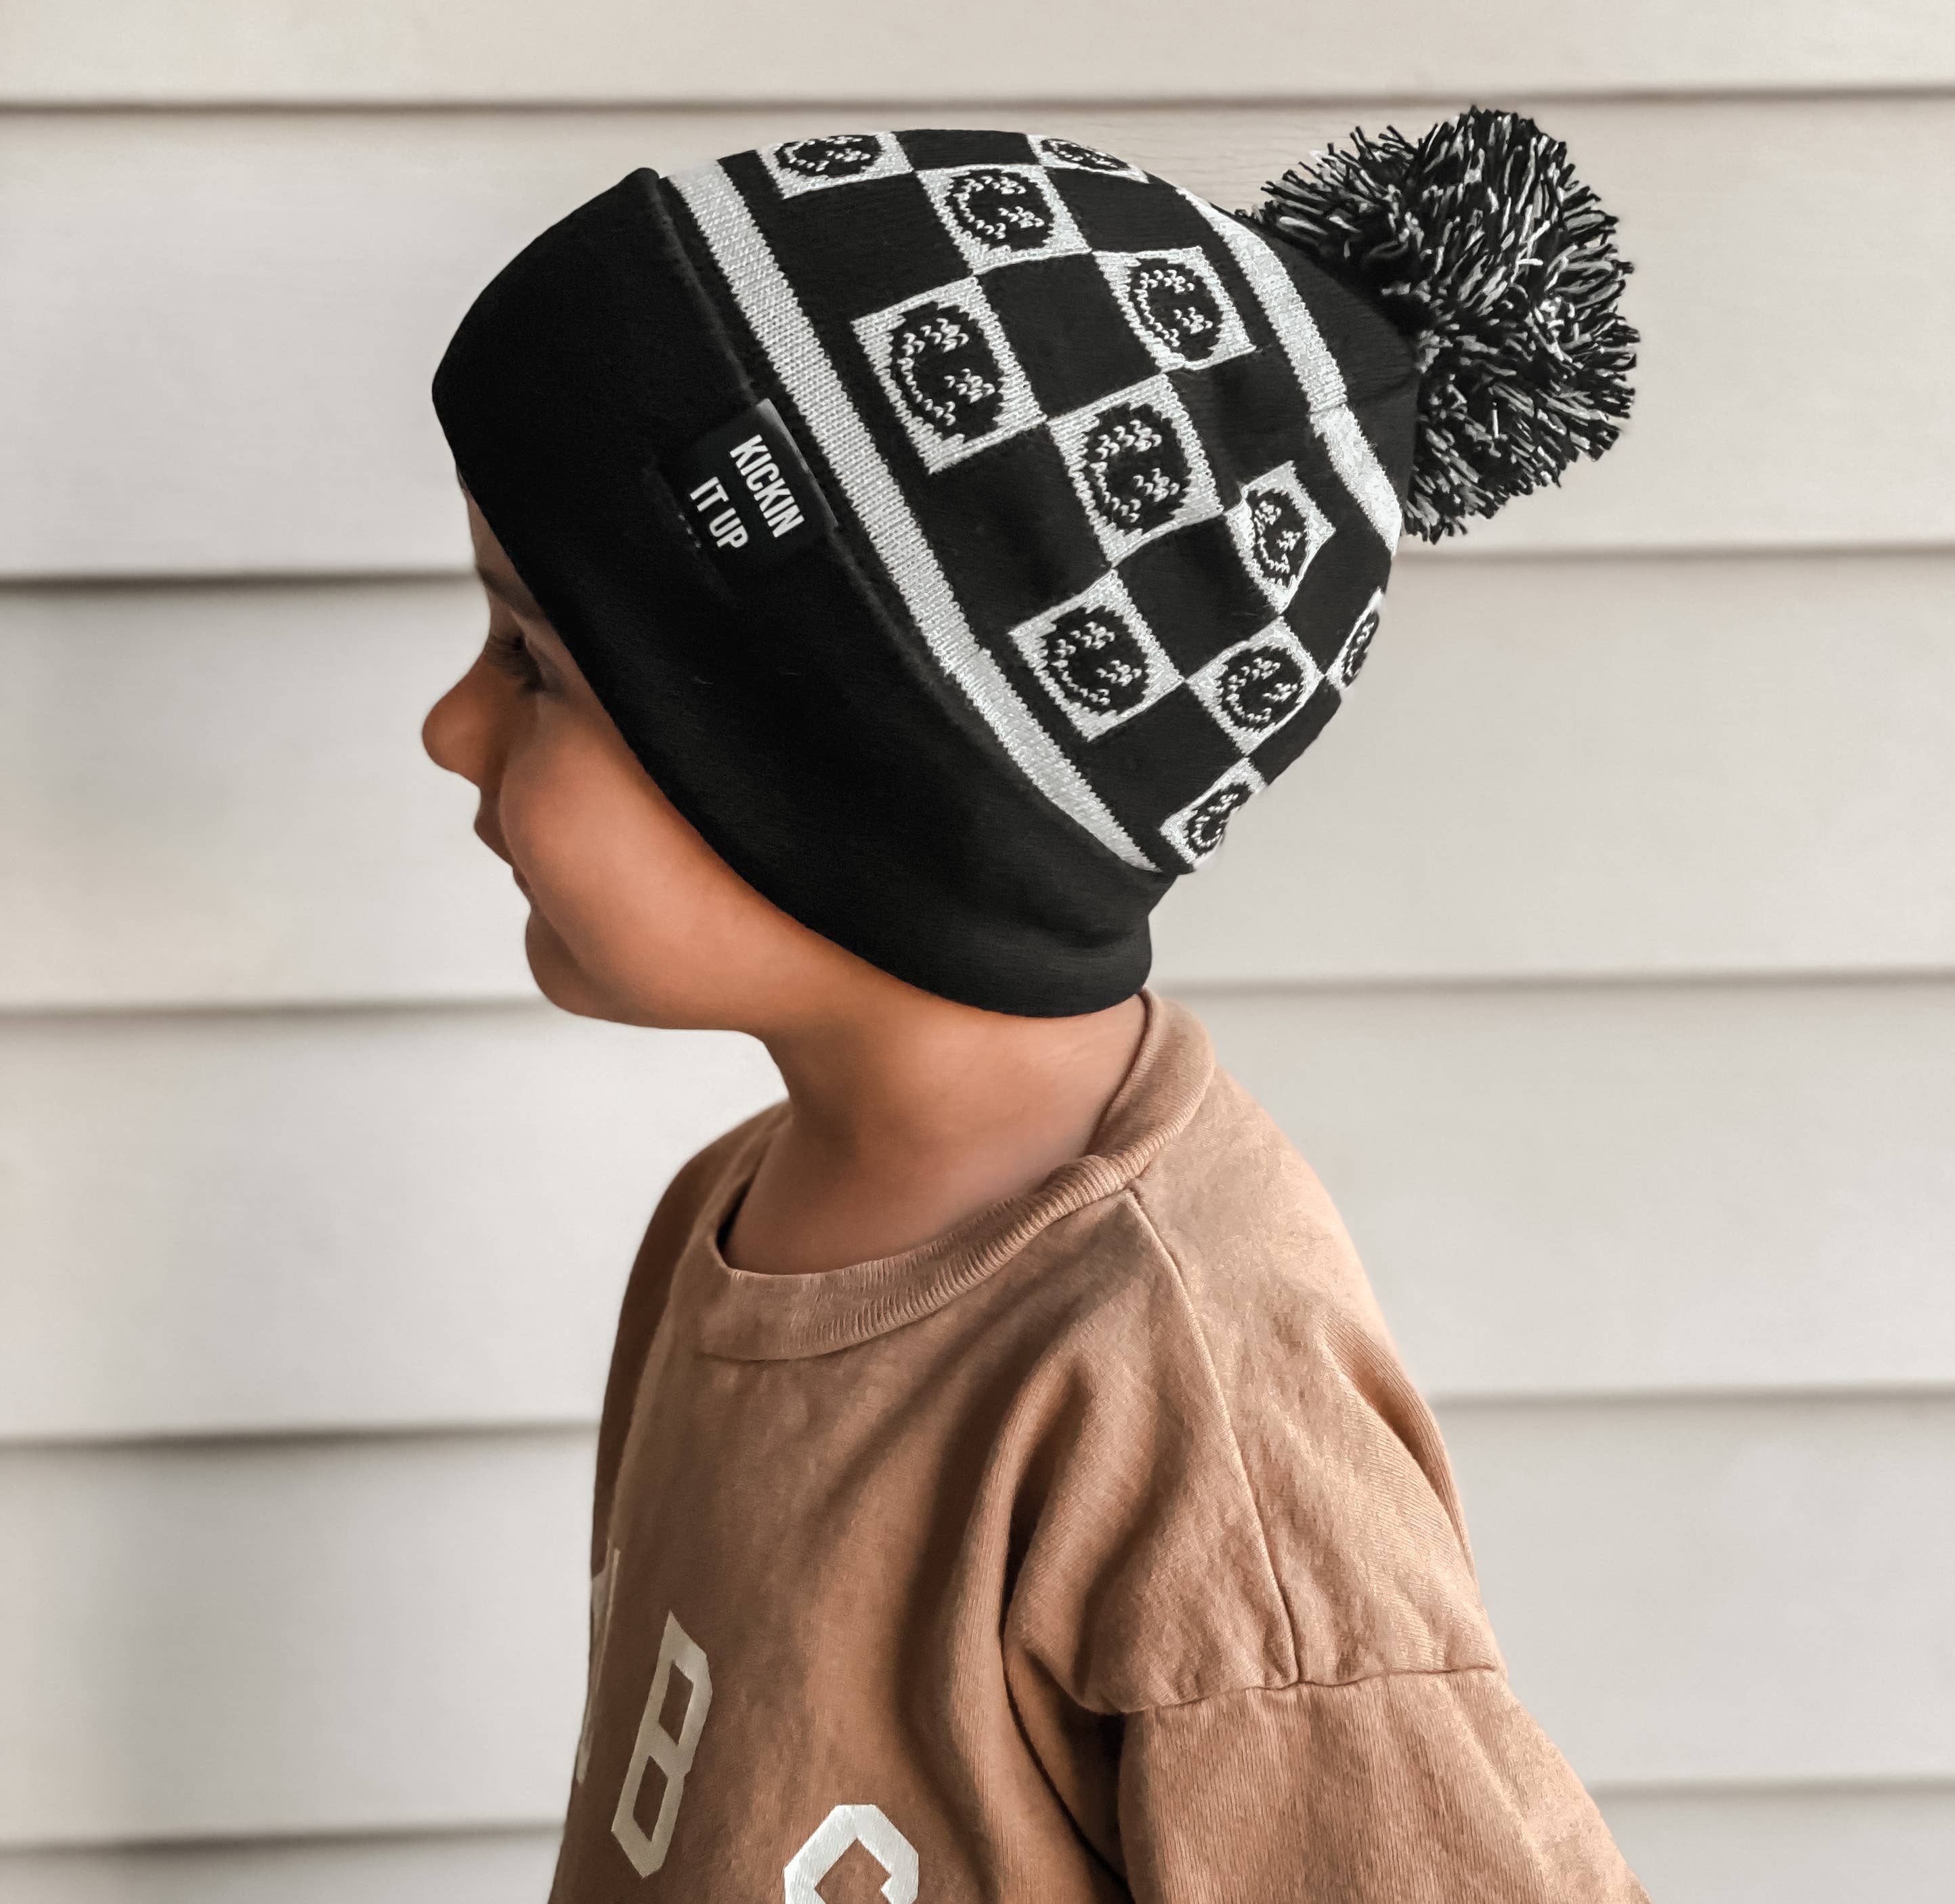 Black Smiley Check Beanie: Toddler 18 Months-4.5 Years Old